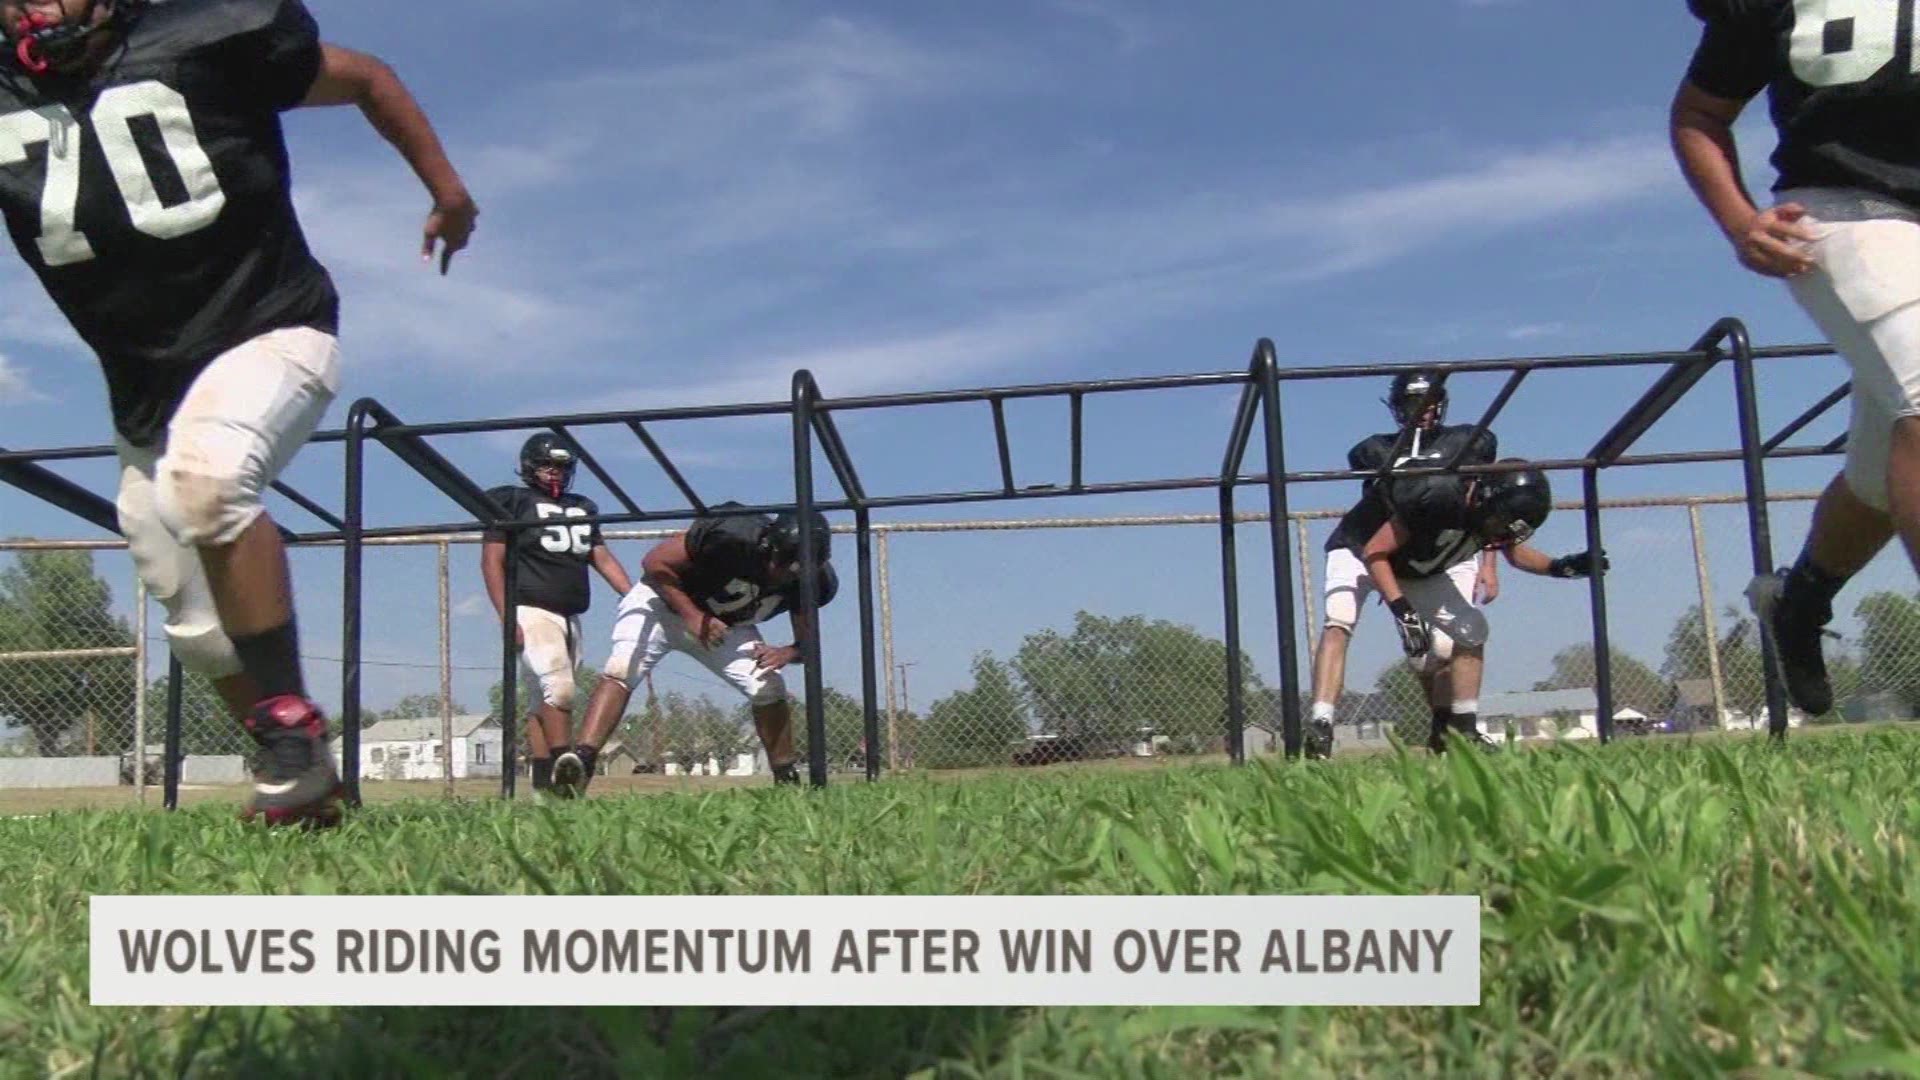 Colorado City came up with a big win over Albany in the opening game. Now, the team has a lot of momentum on their side.